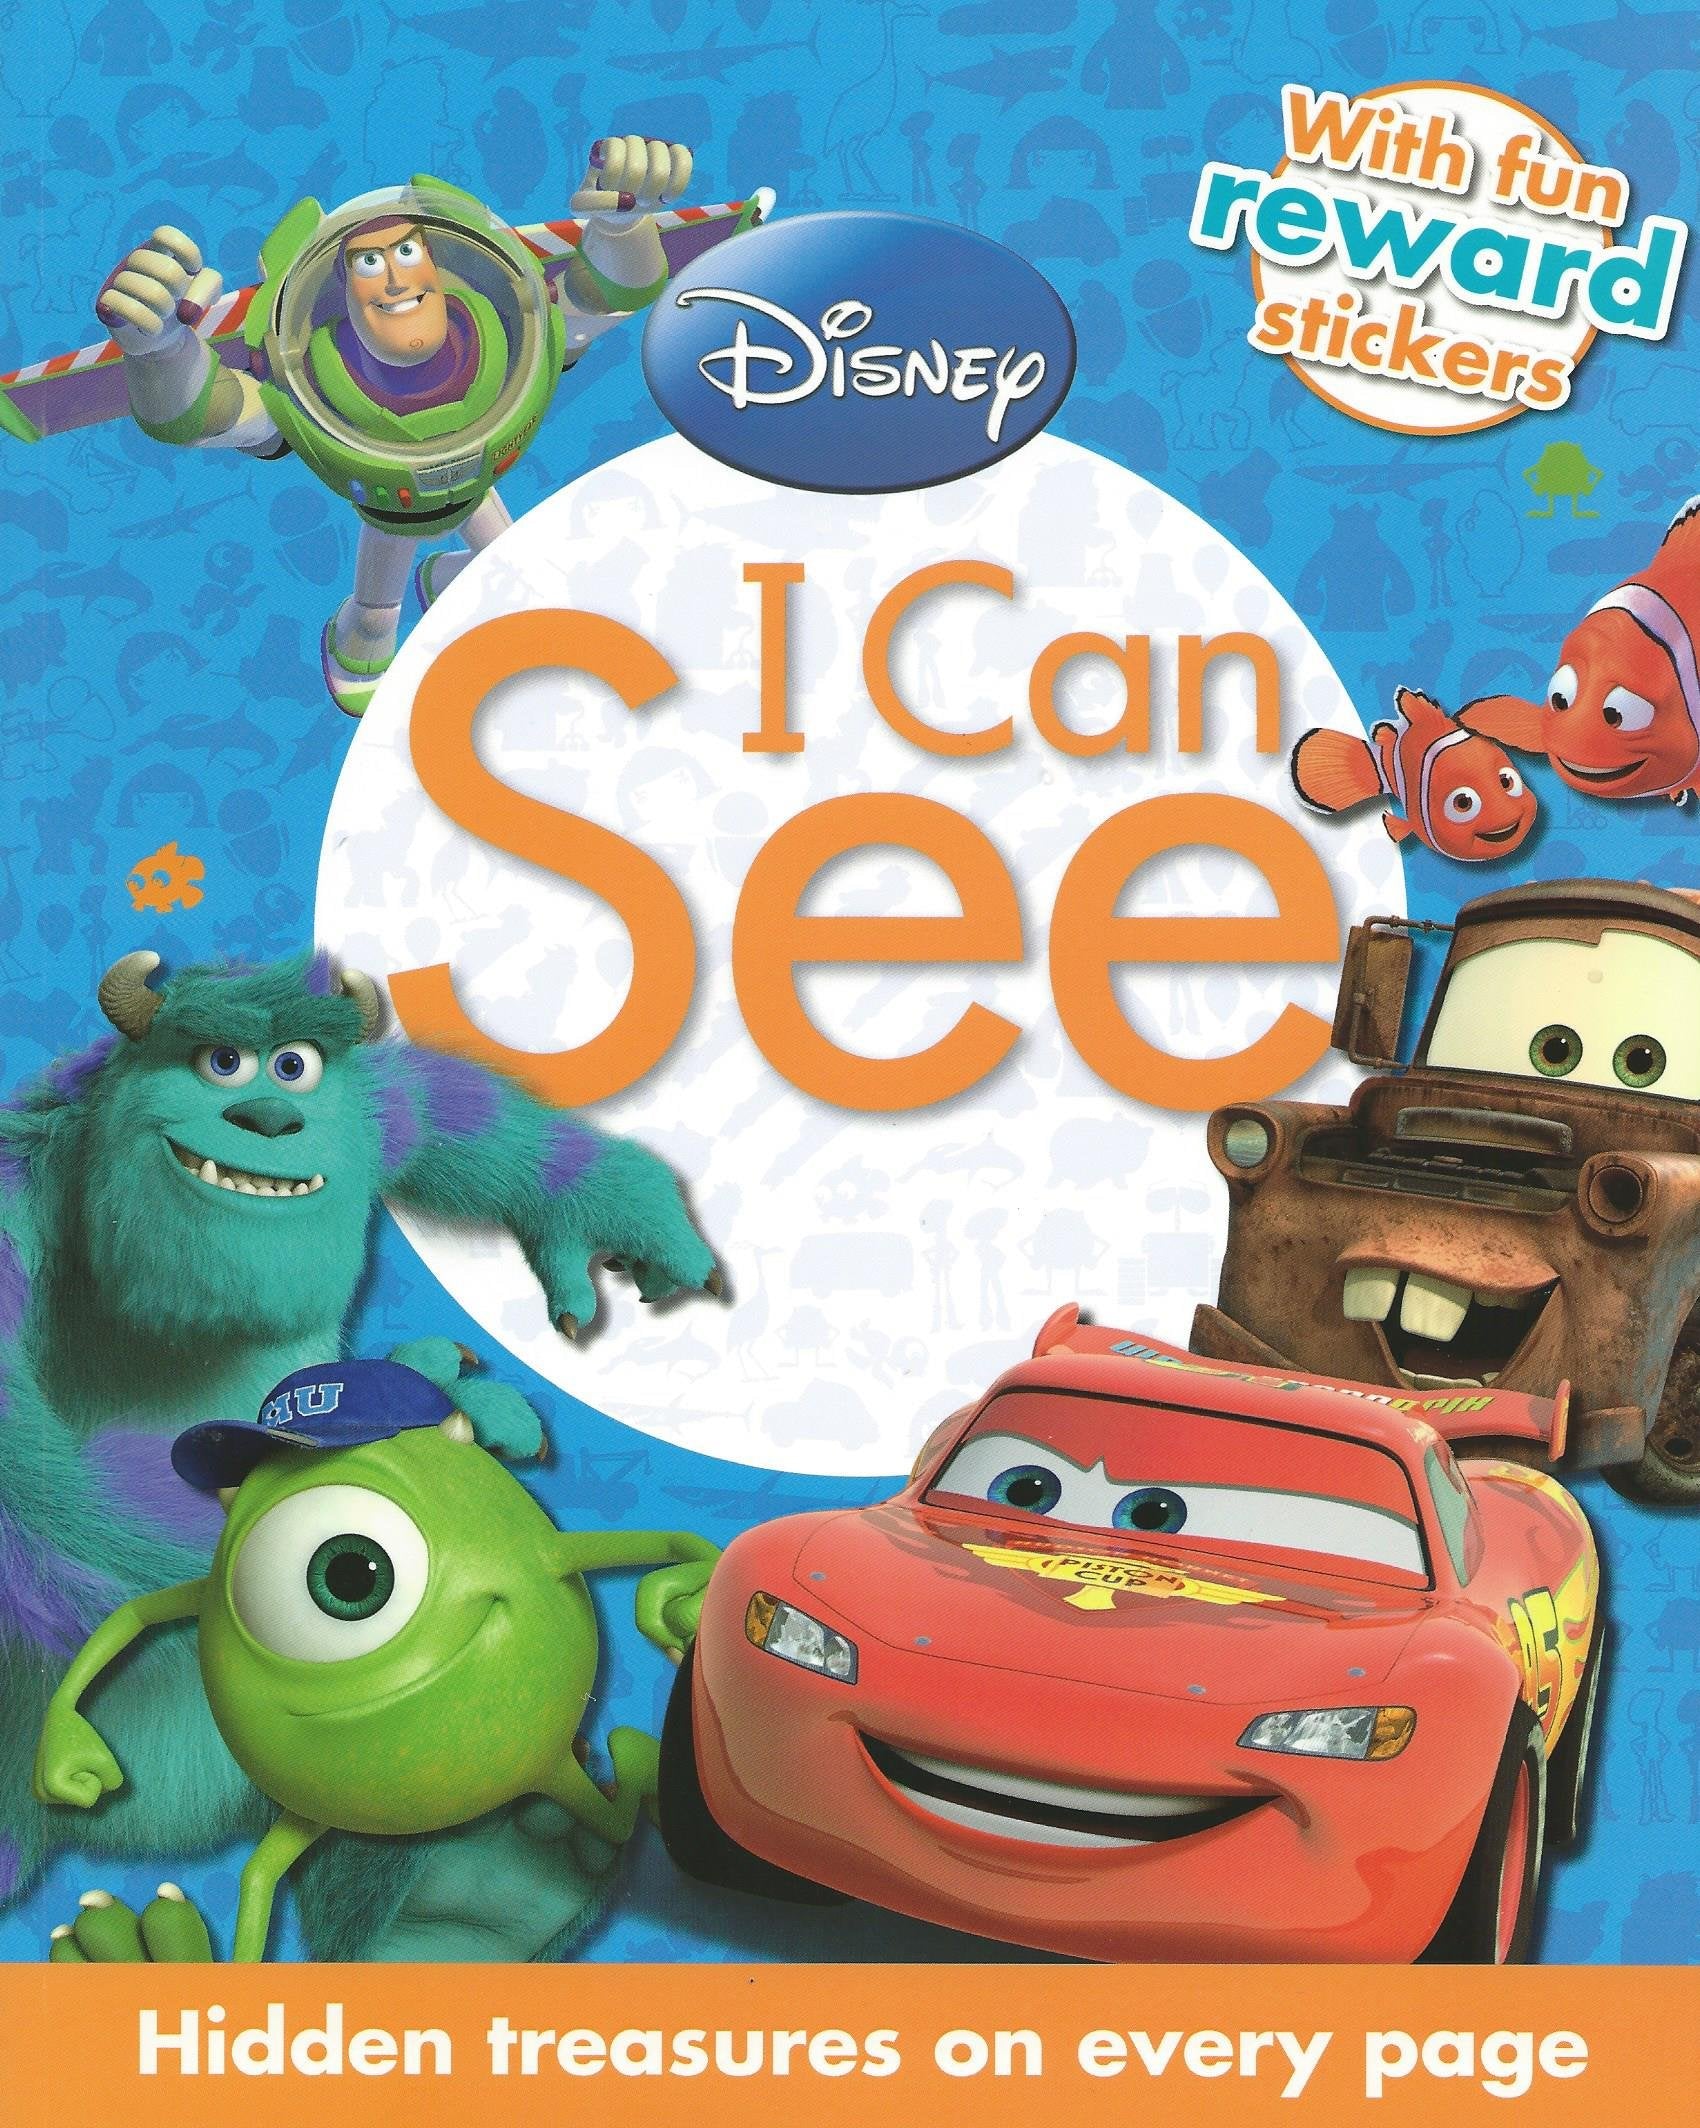 Disney Pixar I Can See: Hidden treasures on every page